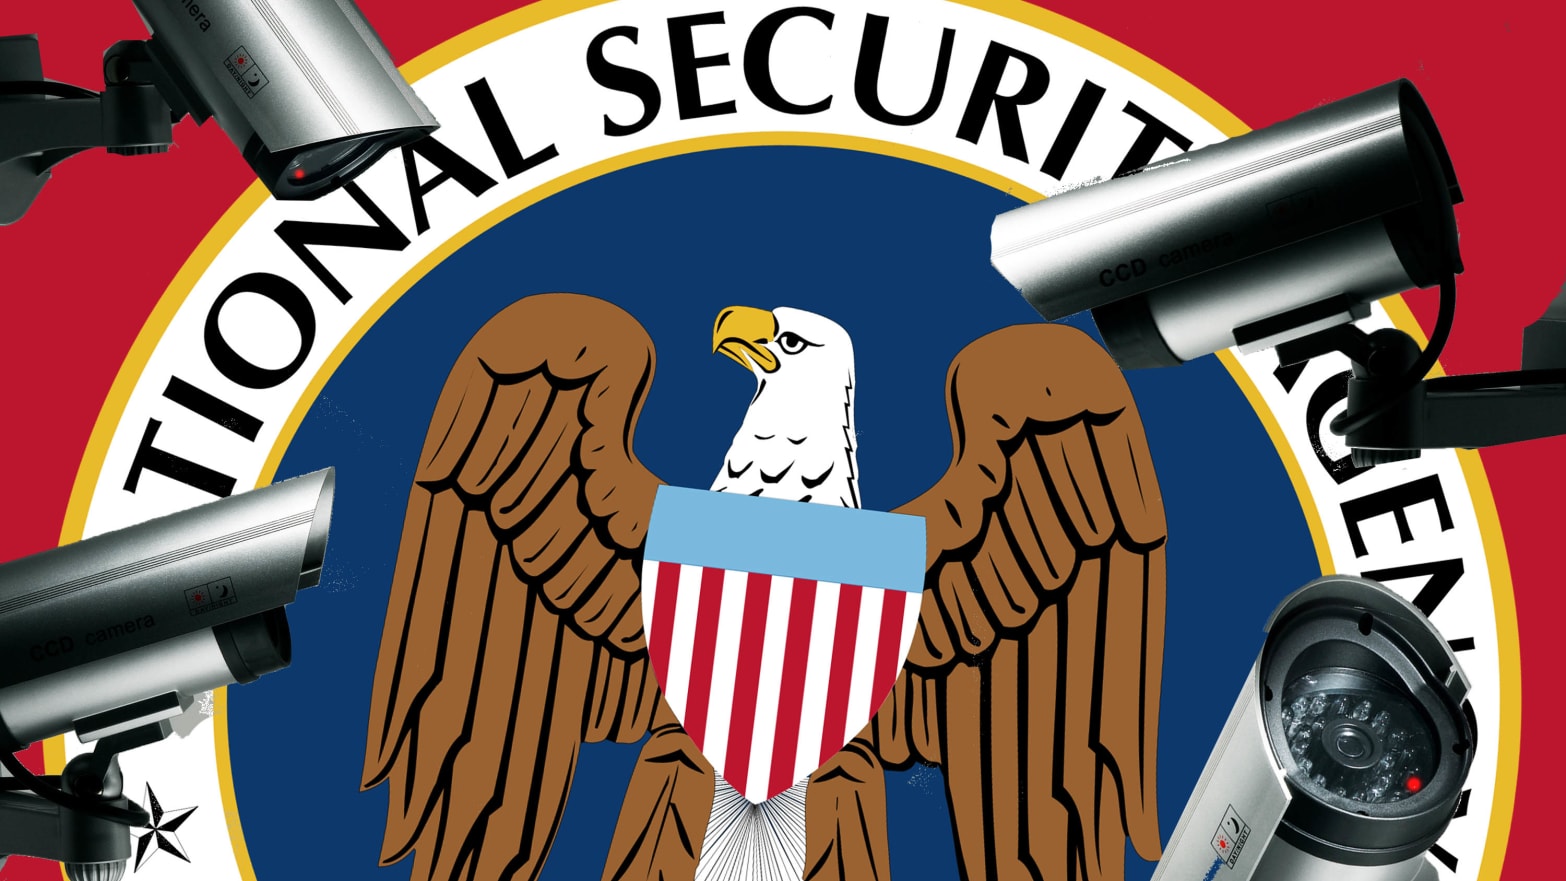 NSA uses spyware on other countries